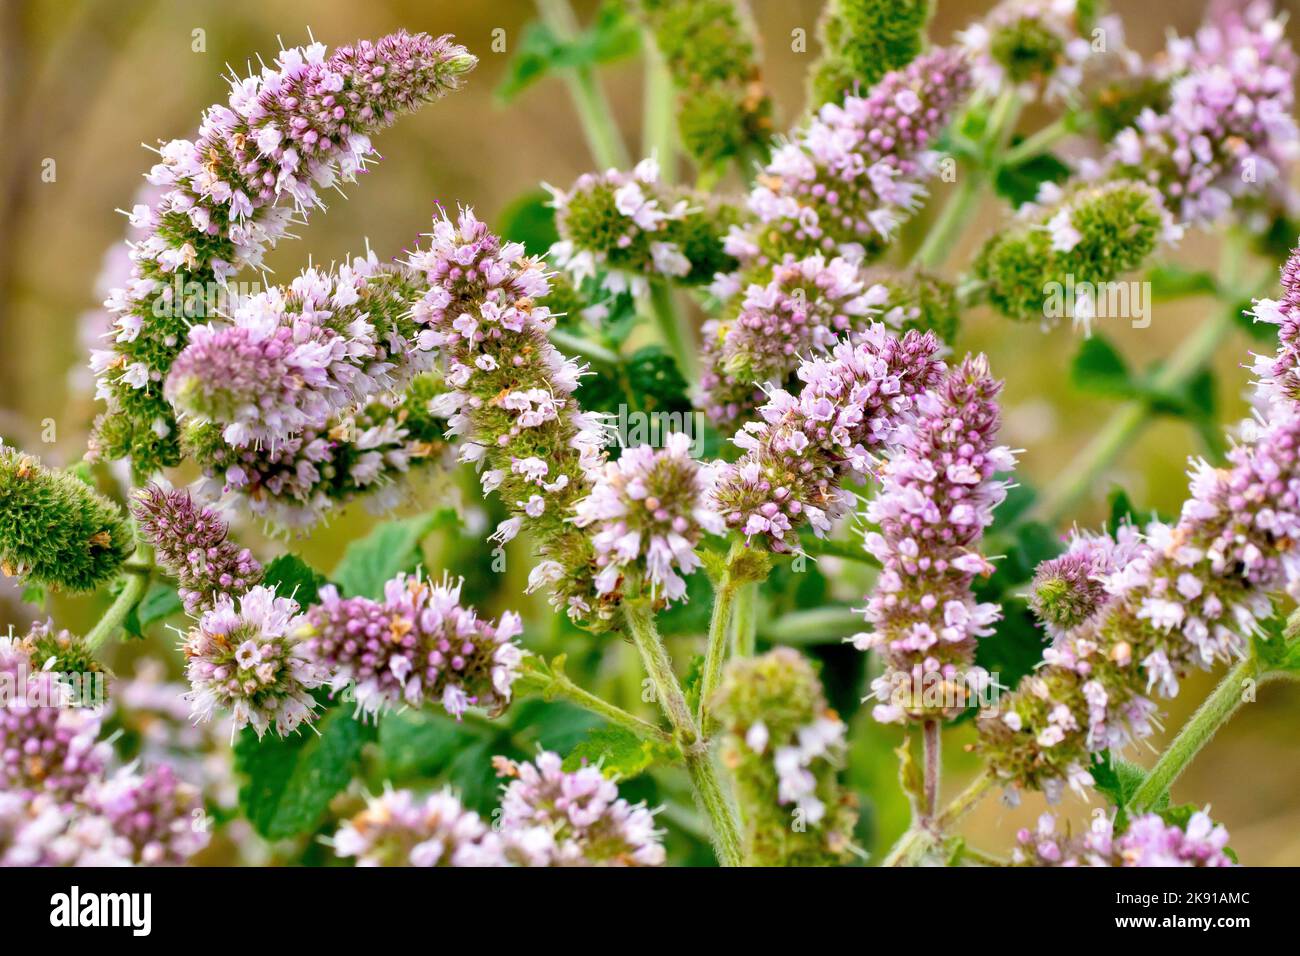 Mint, possibly Apple Scented Mint (mentha rotundifolia), close up showing a cluster of flowering spikes full of pink flowers. Stock Photo